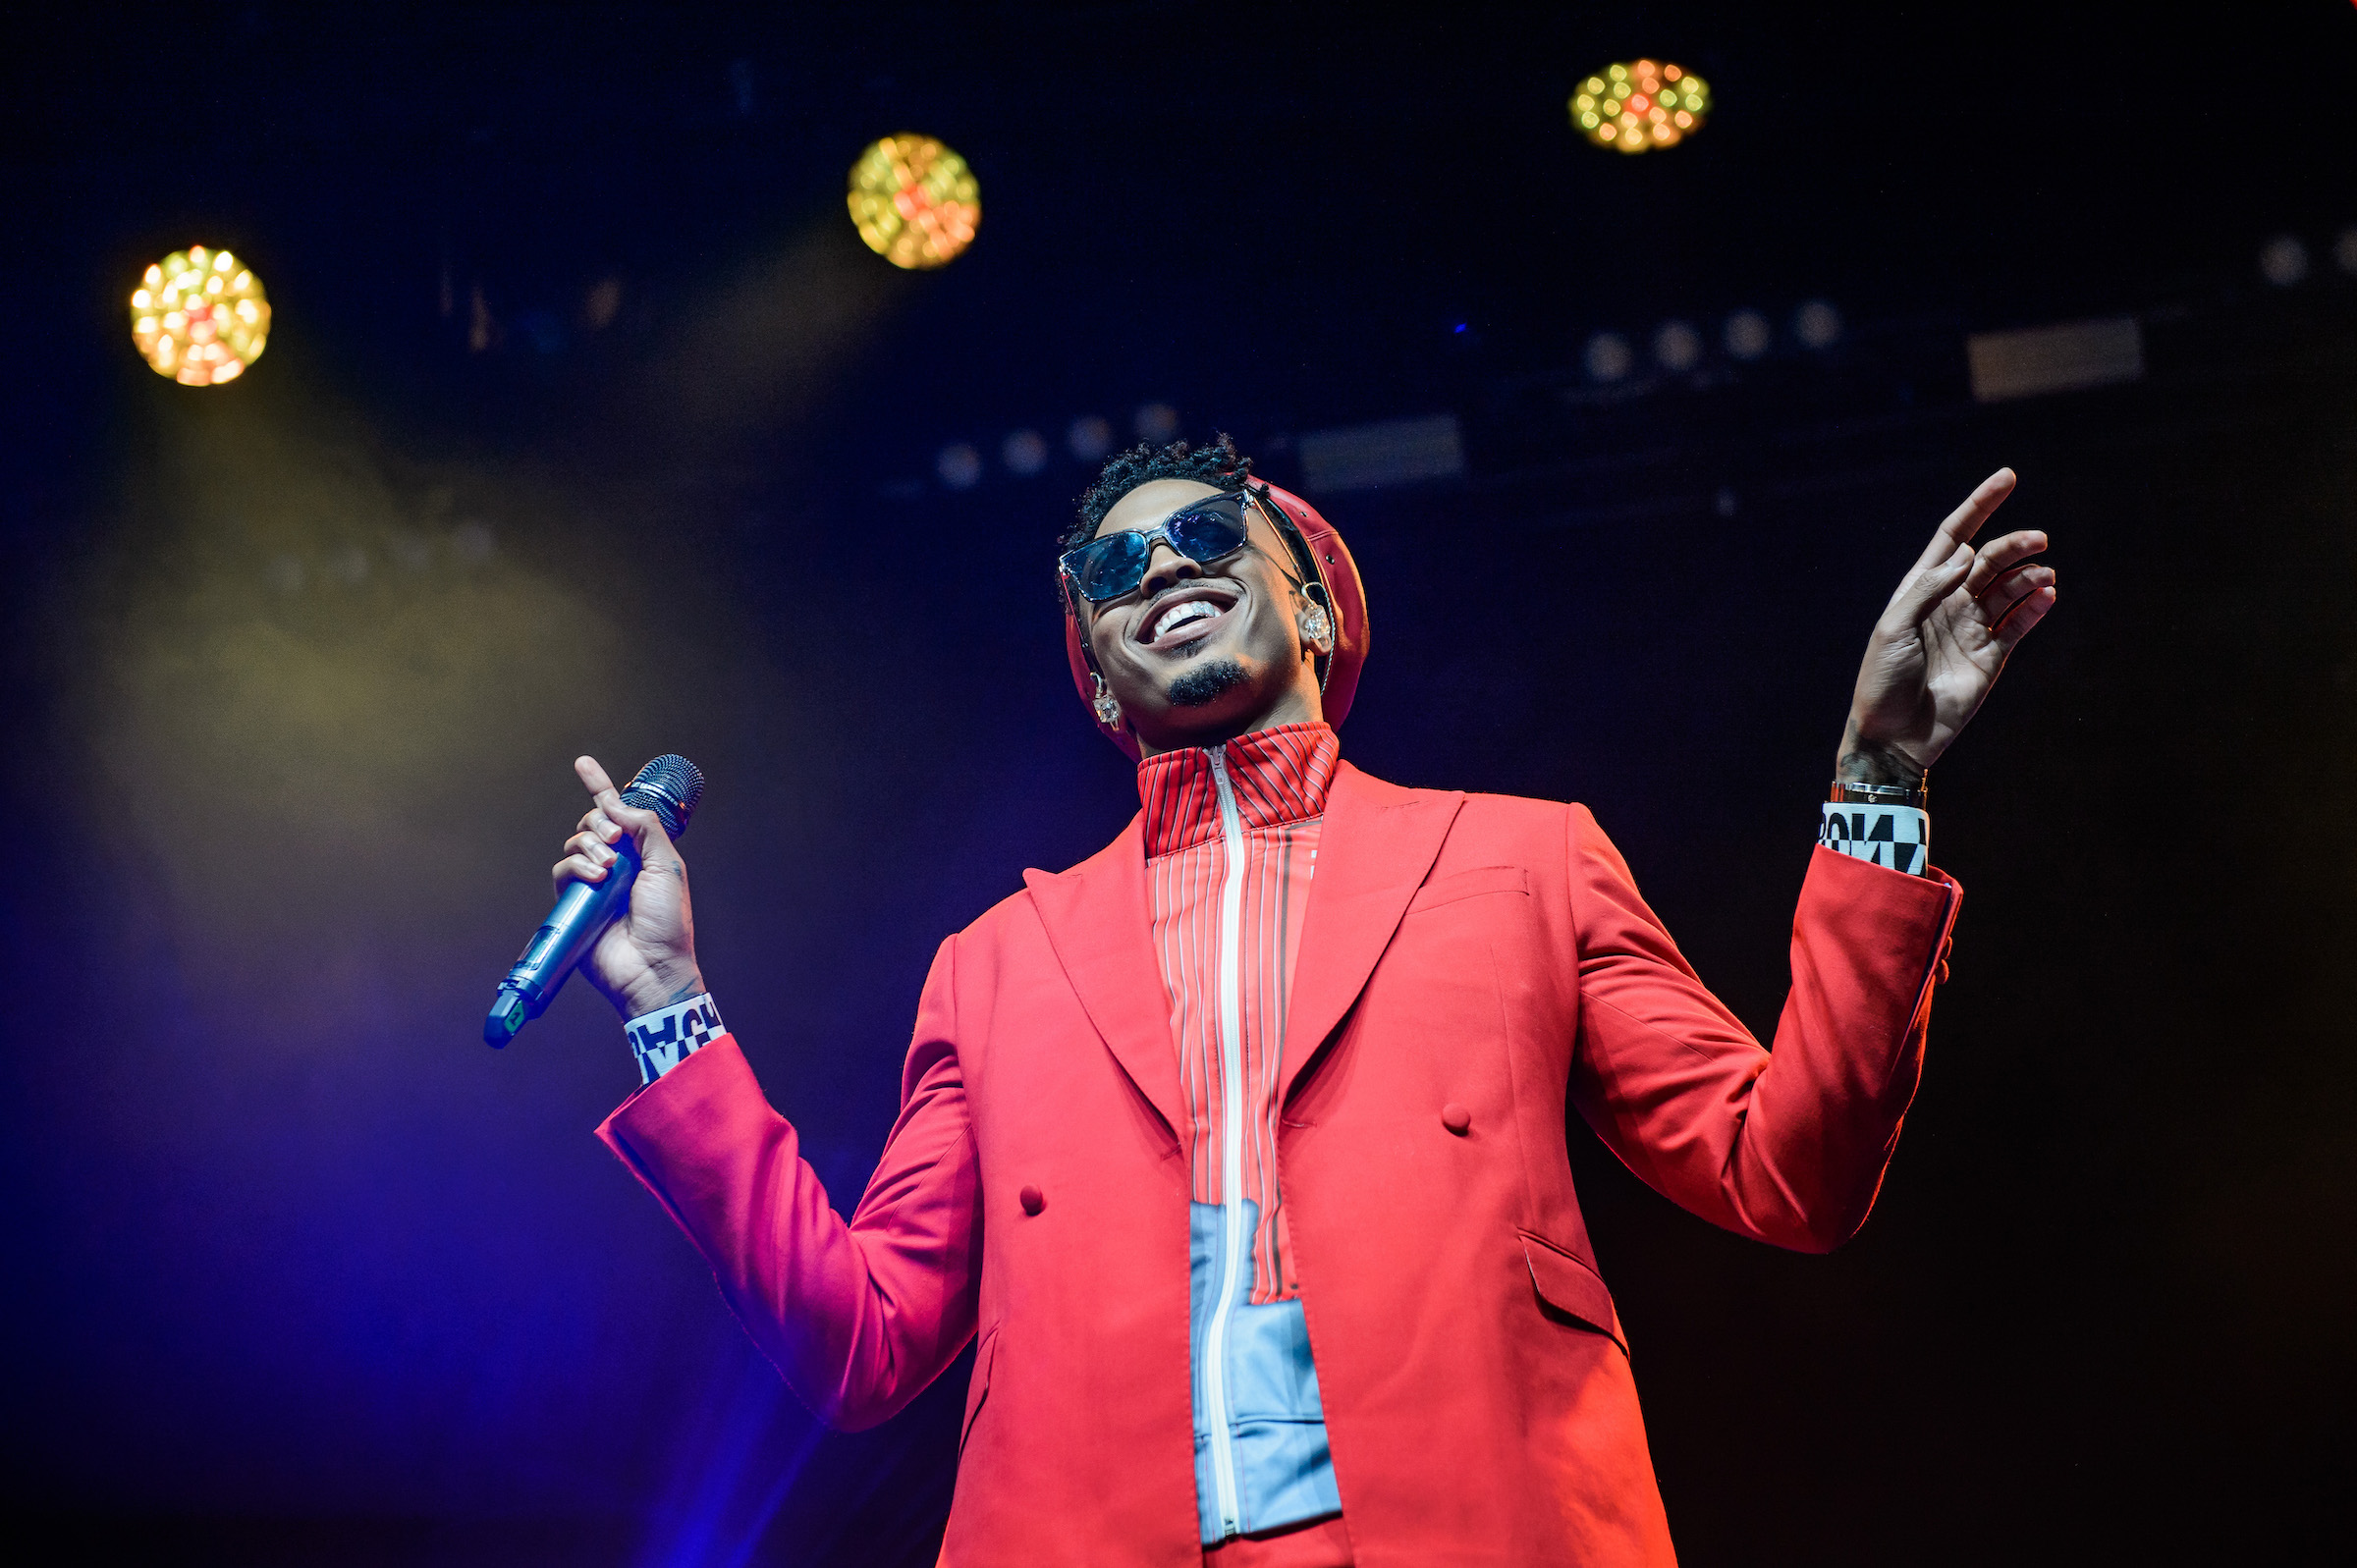 August Alsina wearing red performing